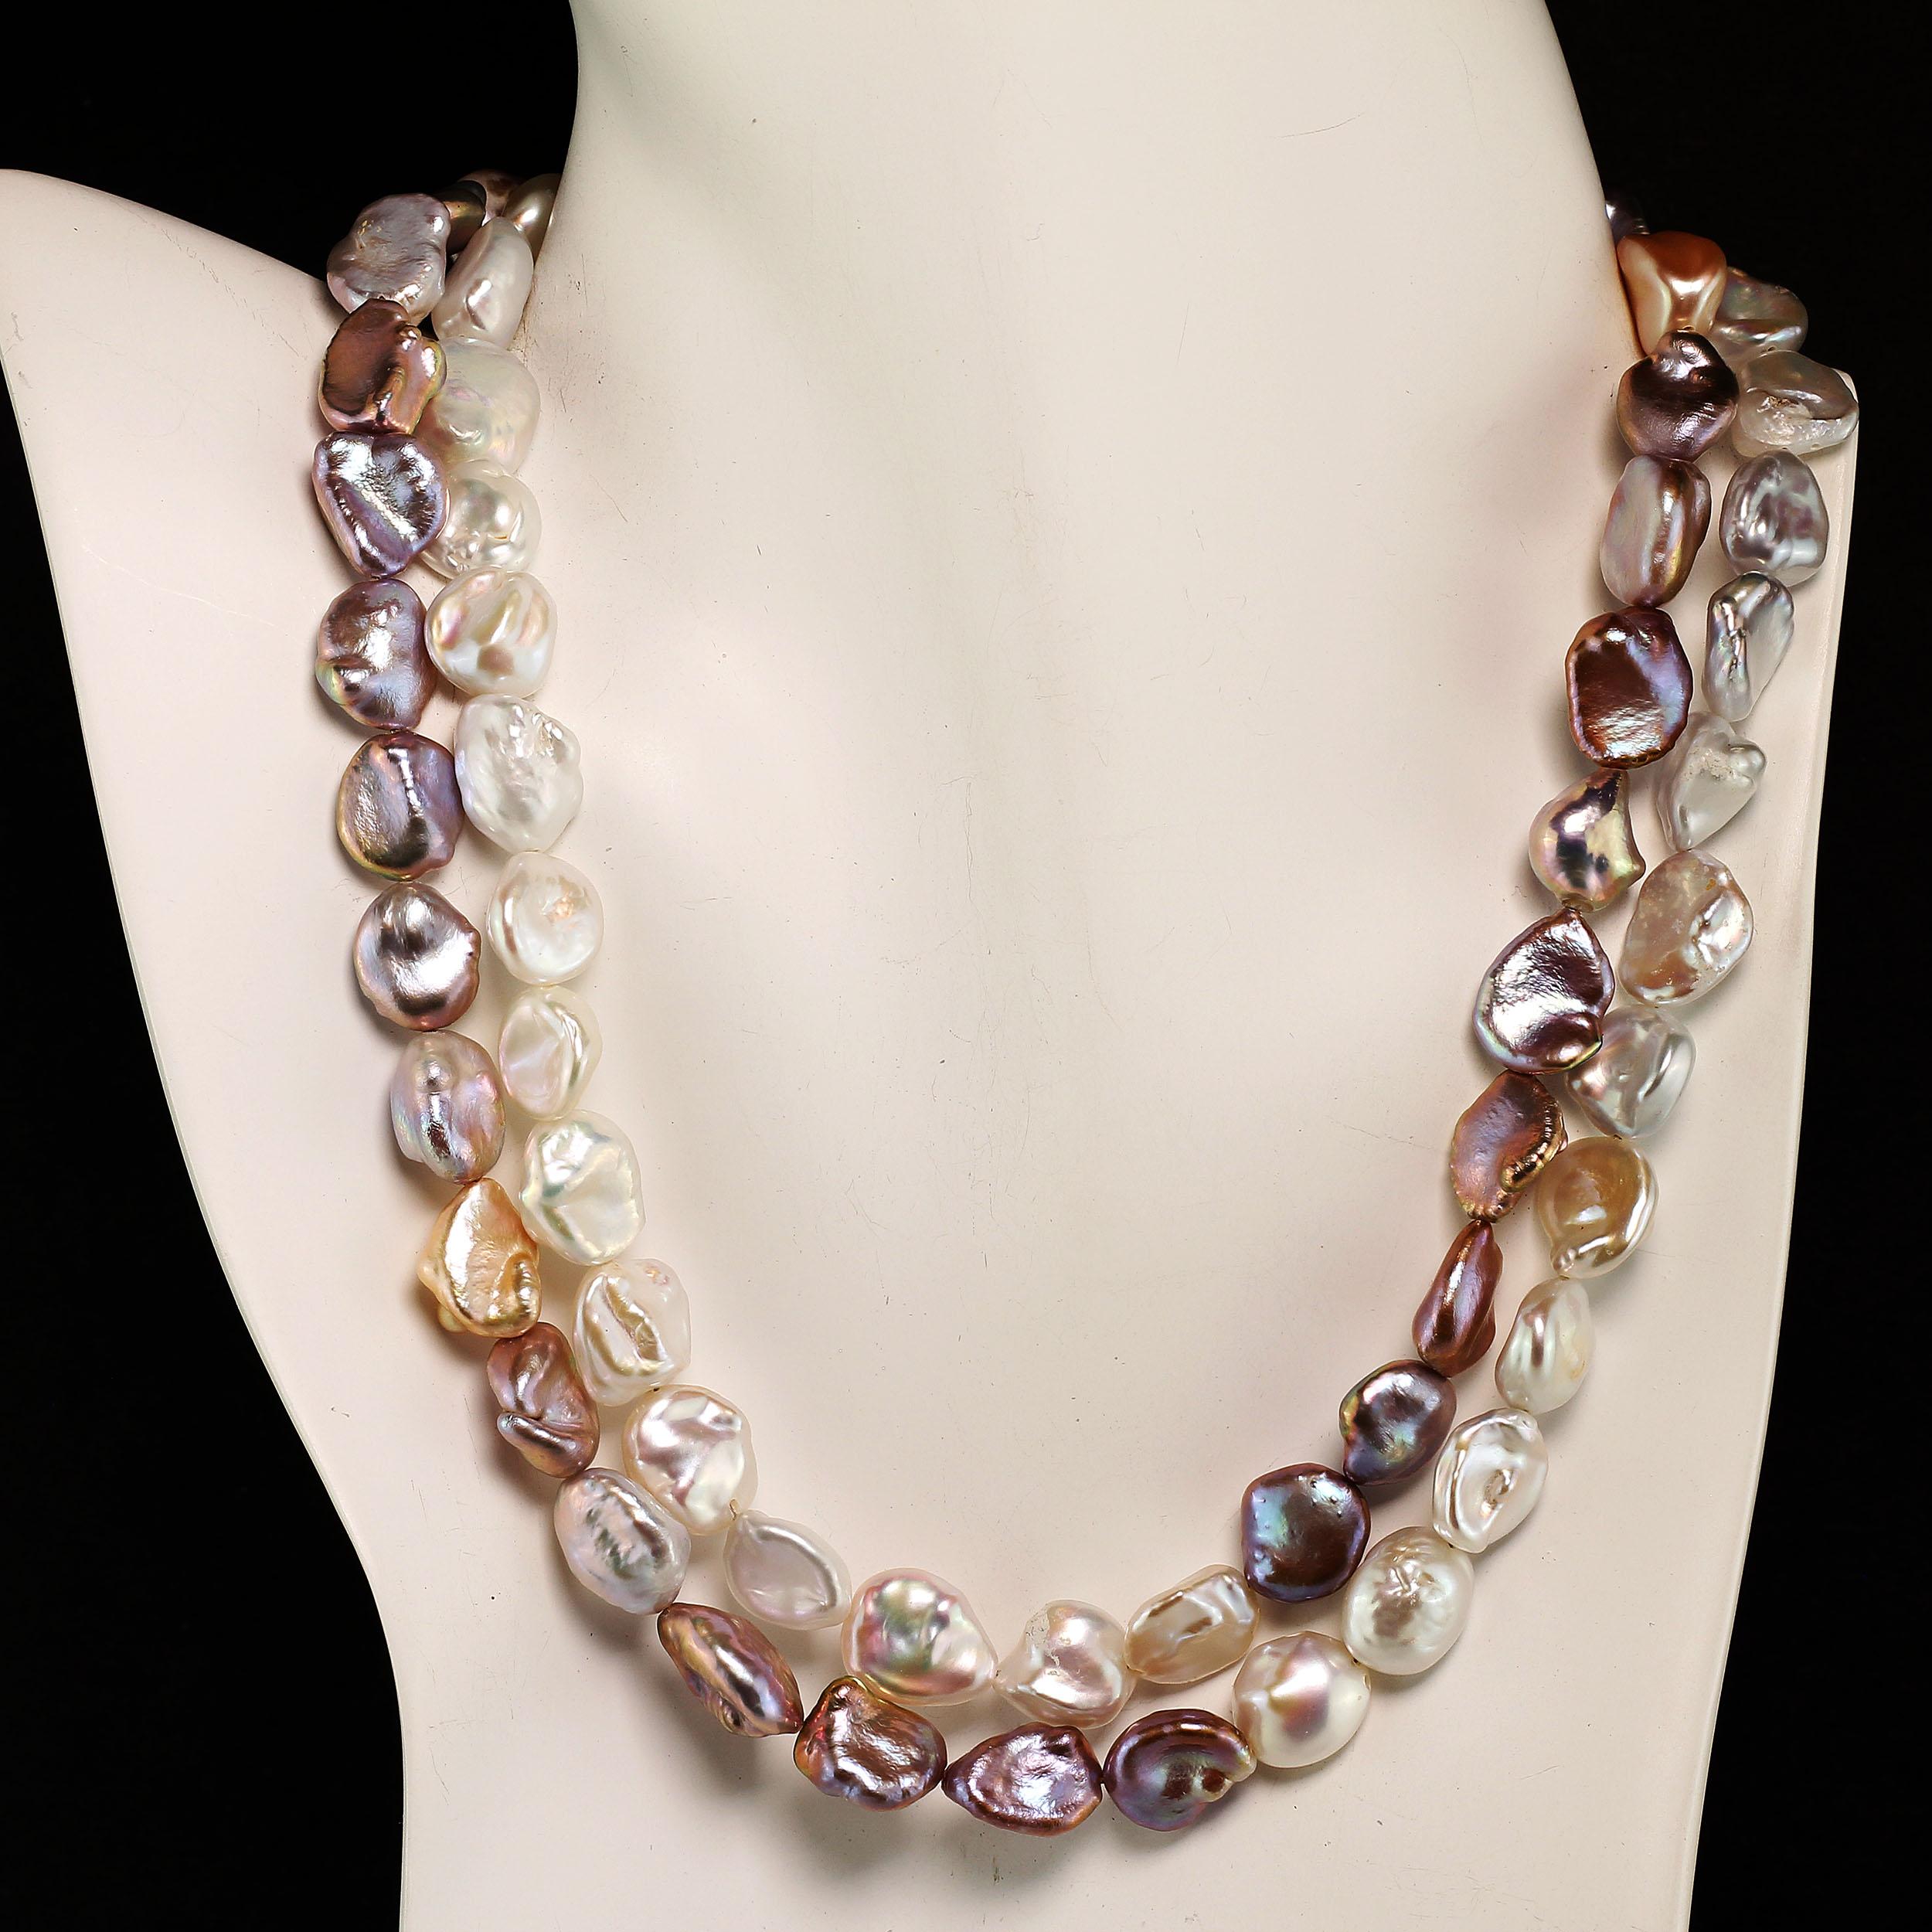 Artisan AJD 15 Inch Two-Strand Pearls in Silver & White Cross over Pattern Necklace  For Sale